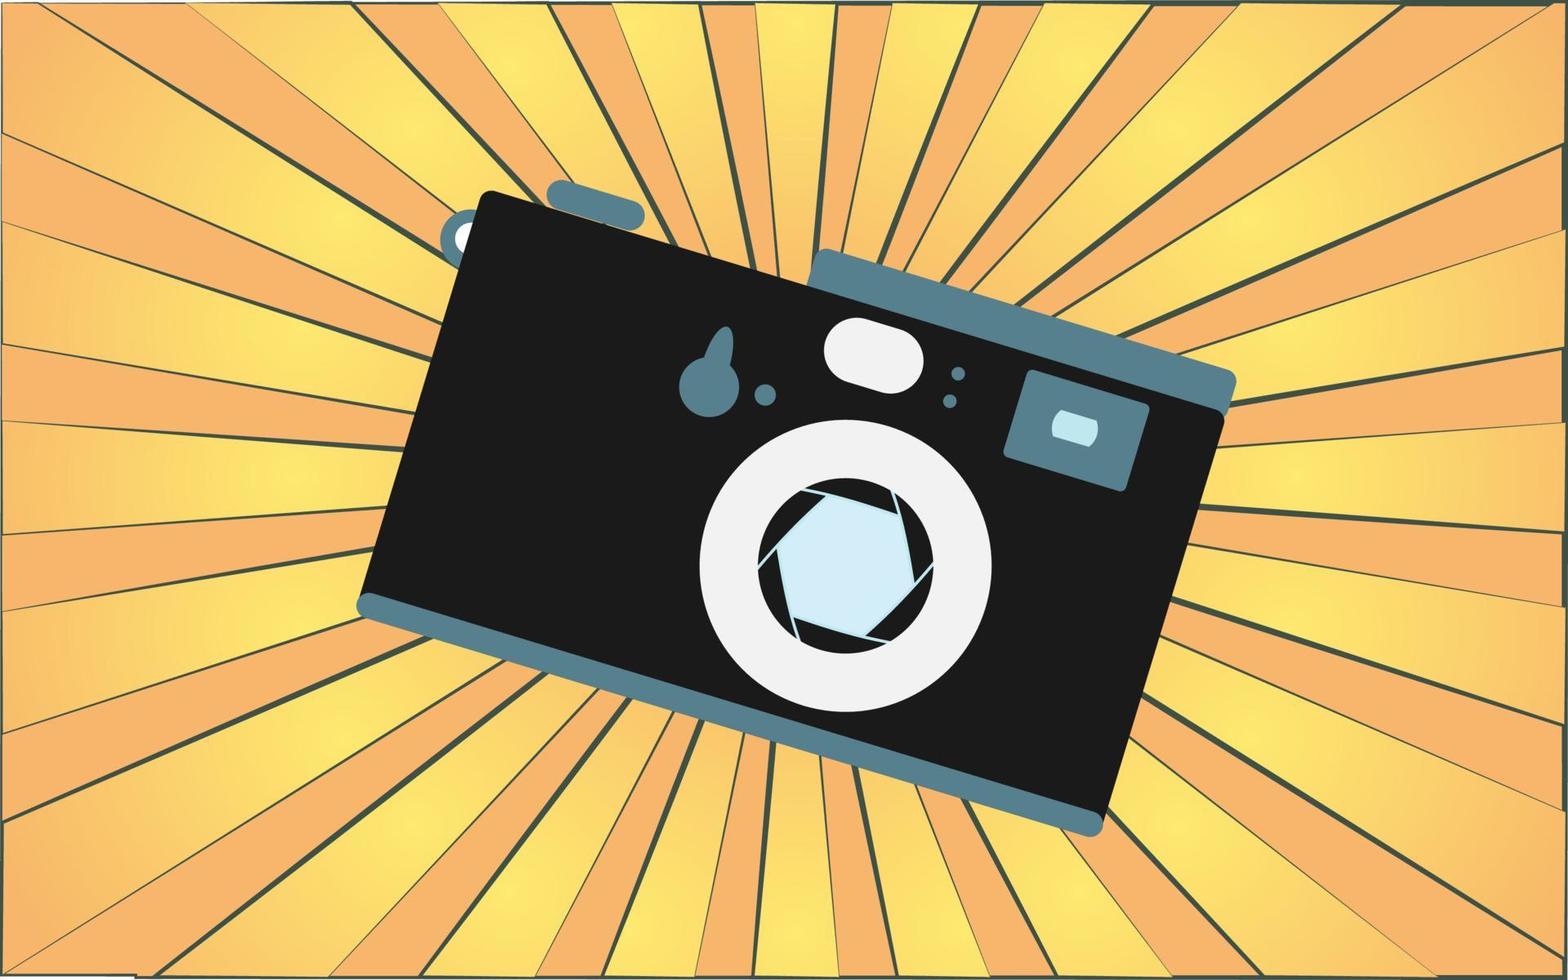 Retro old antique hipster camera from the 70s, 80s, 90s, 2000s against a background of abstract yellow rays. Vector illustration